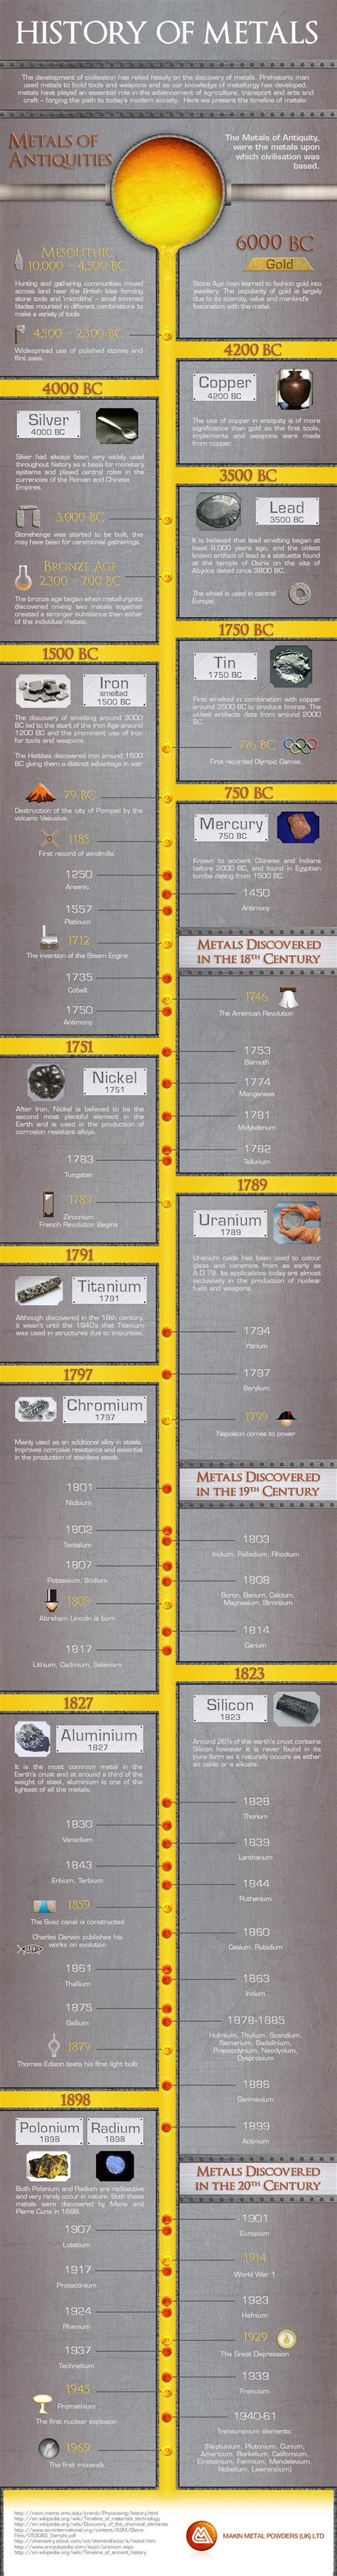 Timeline History Of Metals Infographic Metal History Infographic